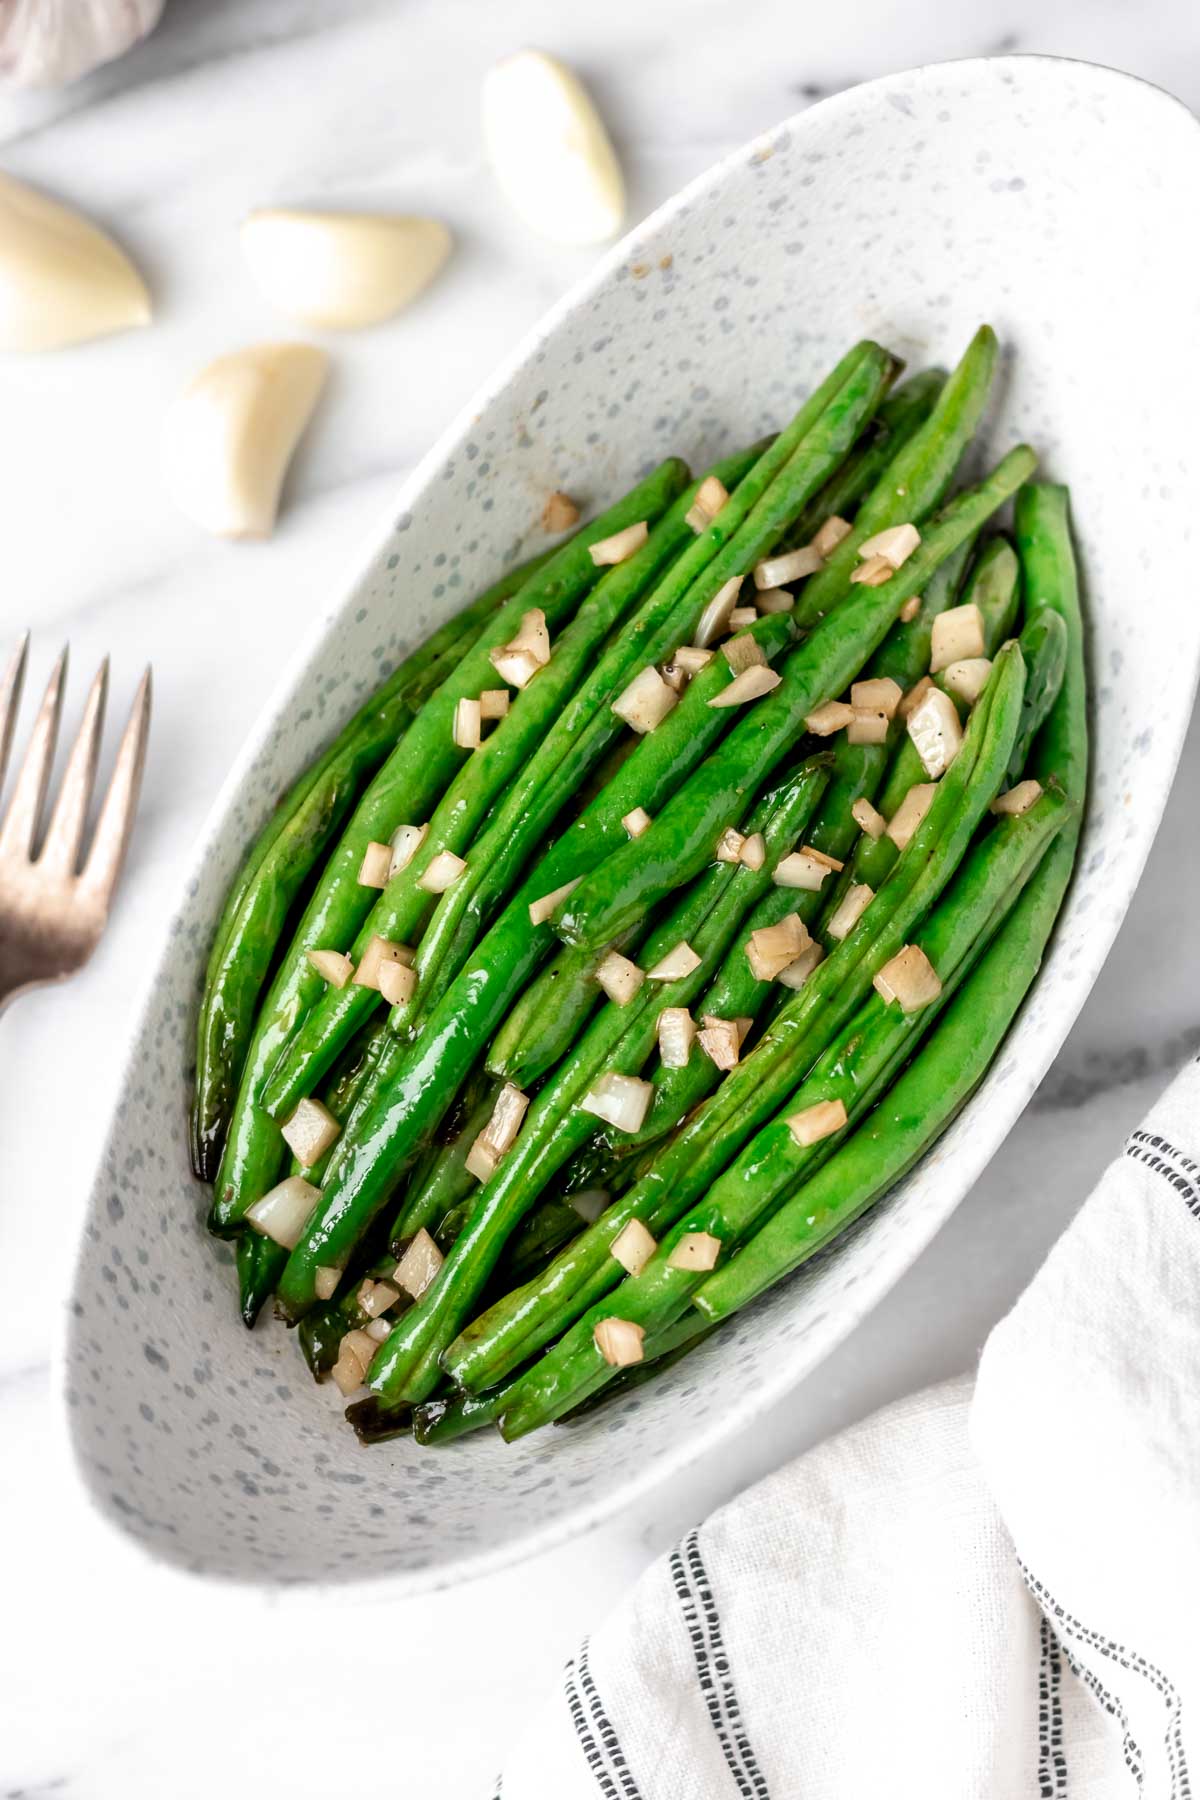 Green beans with garlic in an oblong bowl with a fork and garlic cloves around it.